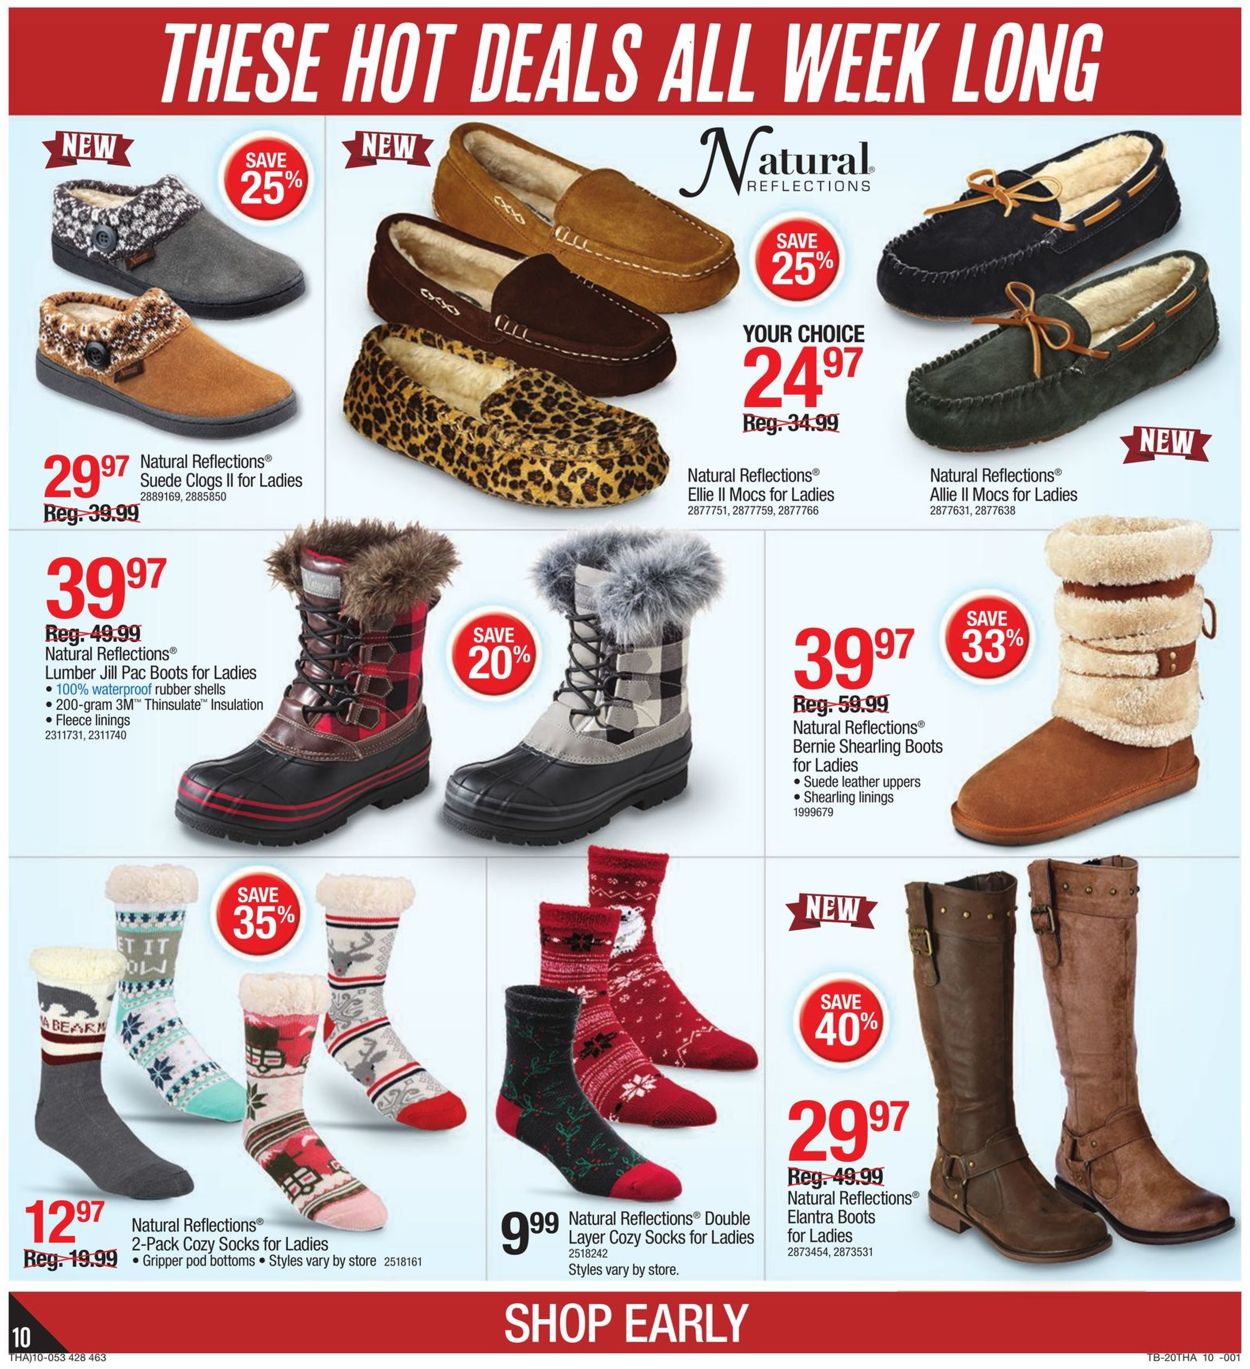 Catalogue Cabela's Black Friday ad 2020 from 11/23/2020